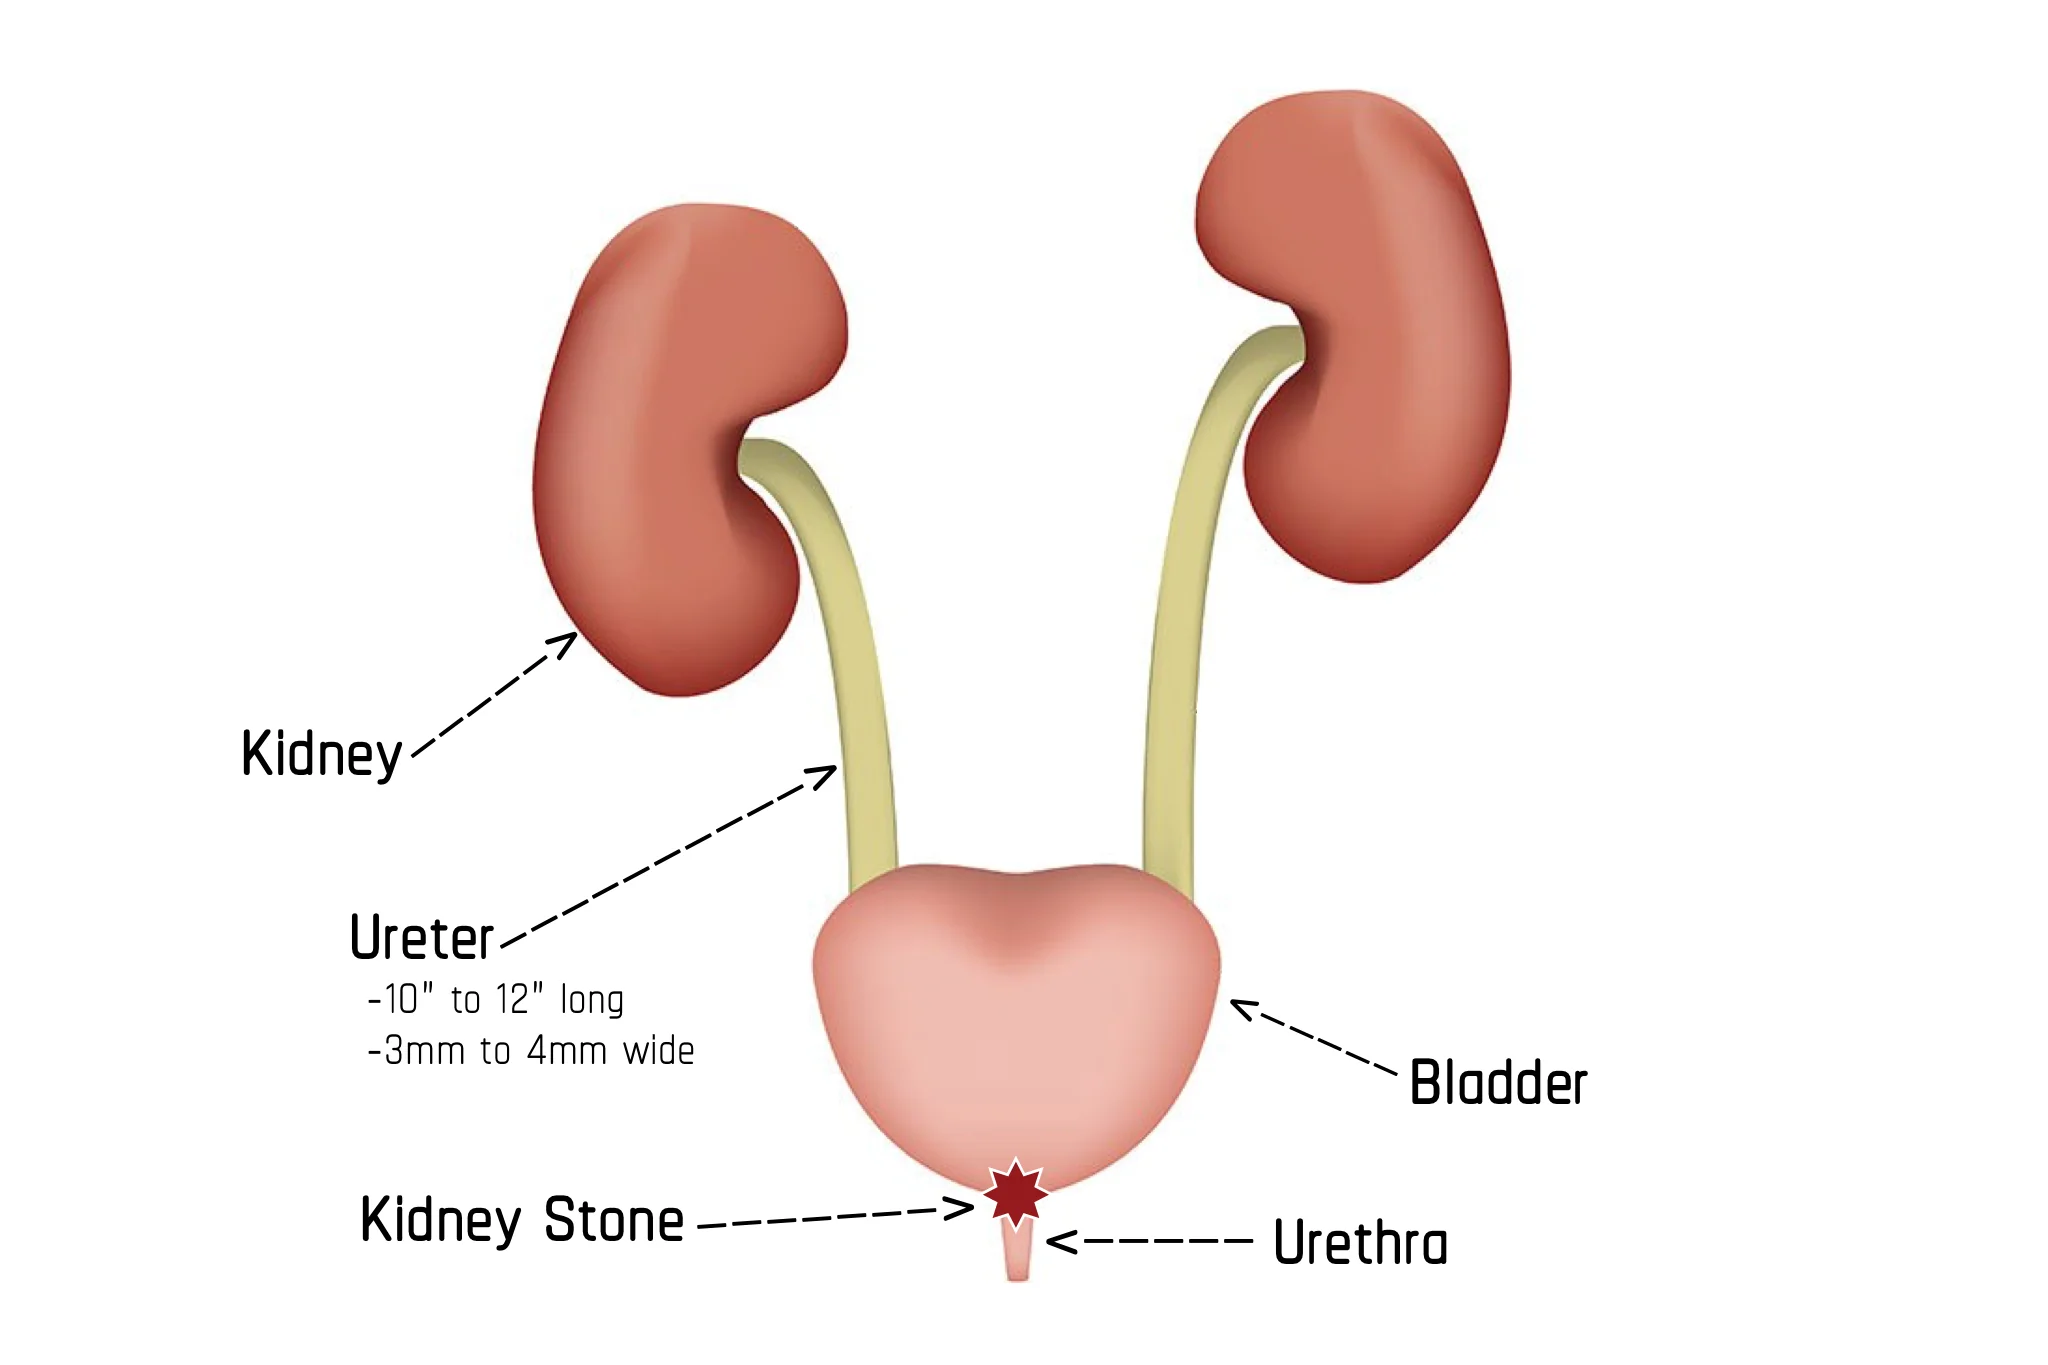 Illustration showing Stage 4 of Passing a Kidney Stone